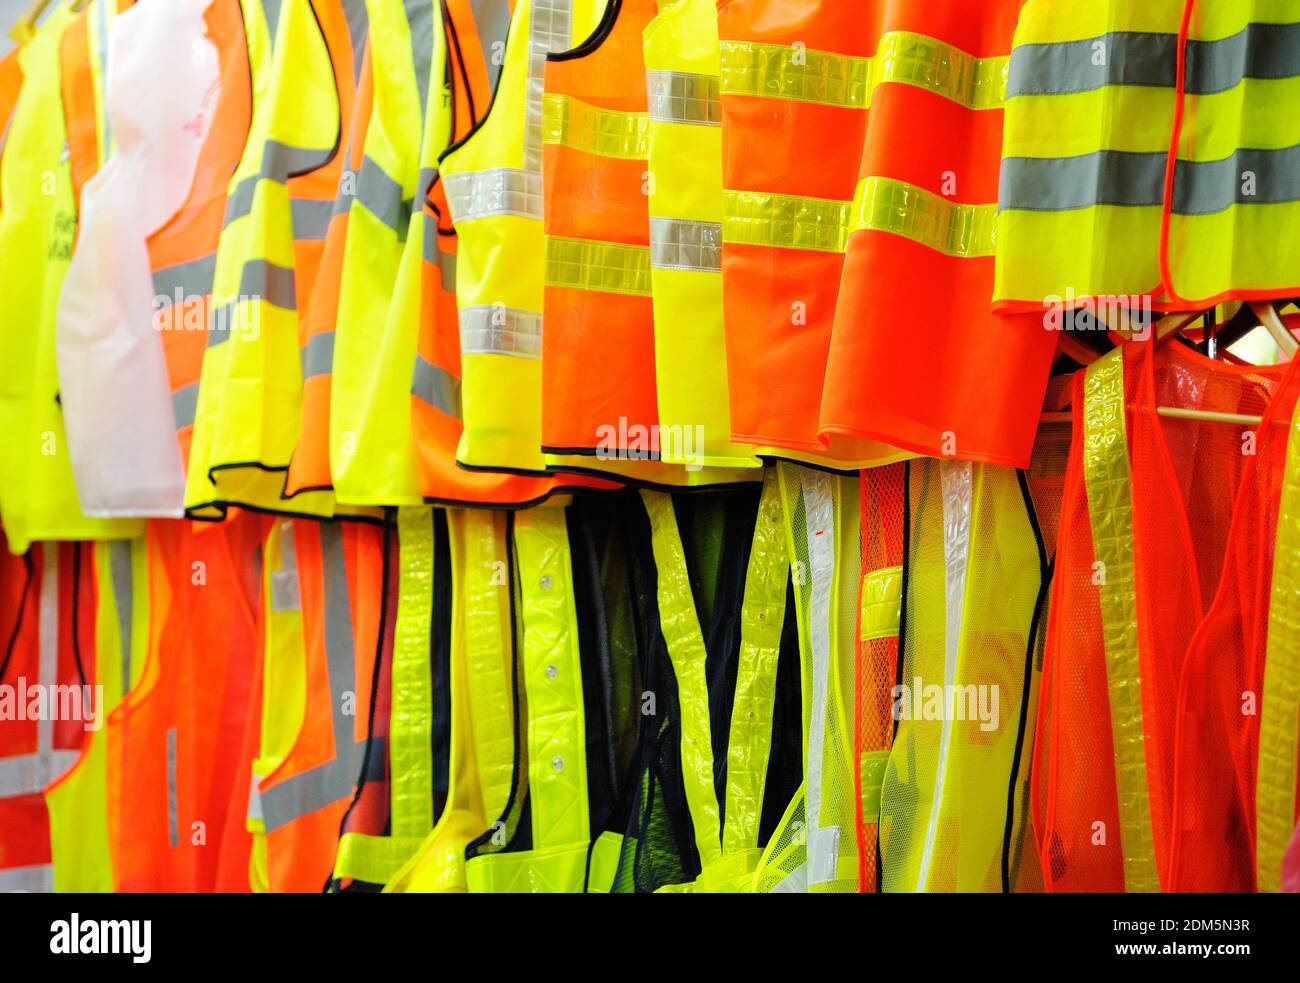 Collection of security reflective cloths, orange and yellow, hanging in row vests. Stock Photo